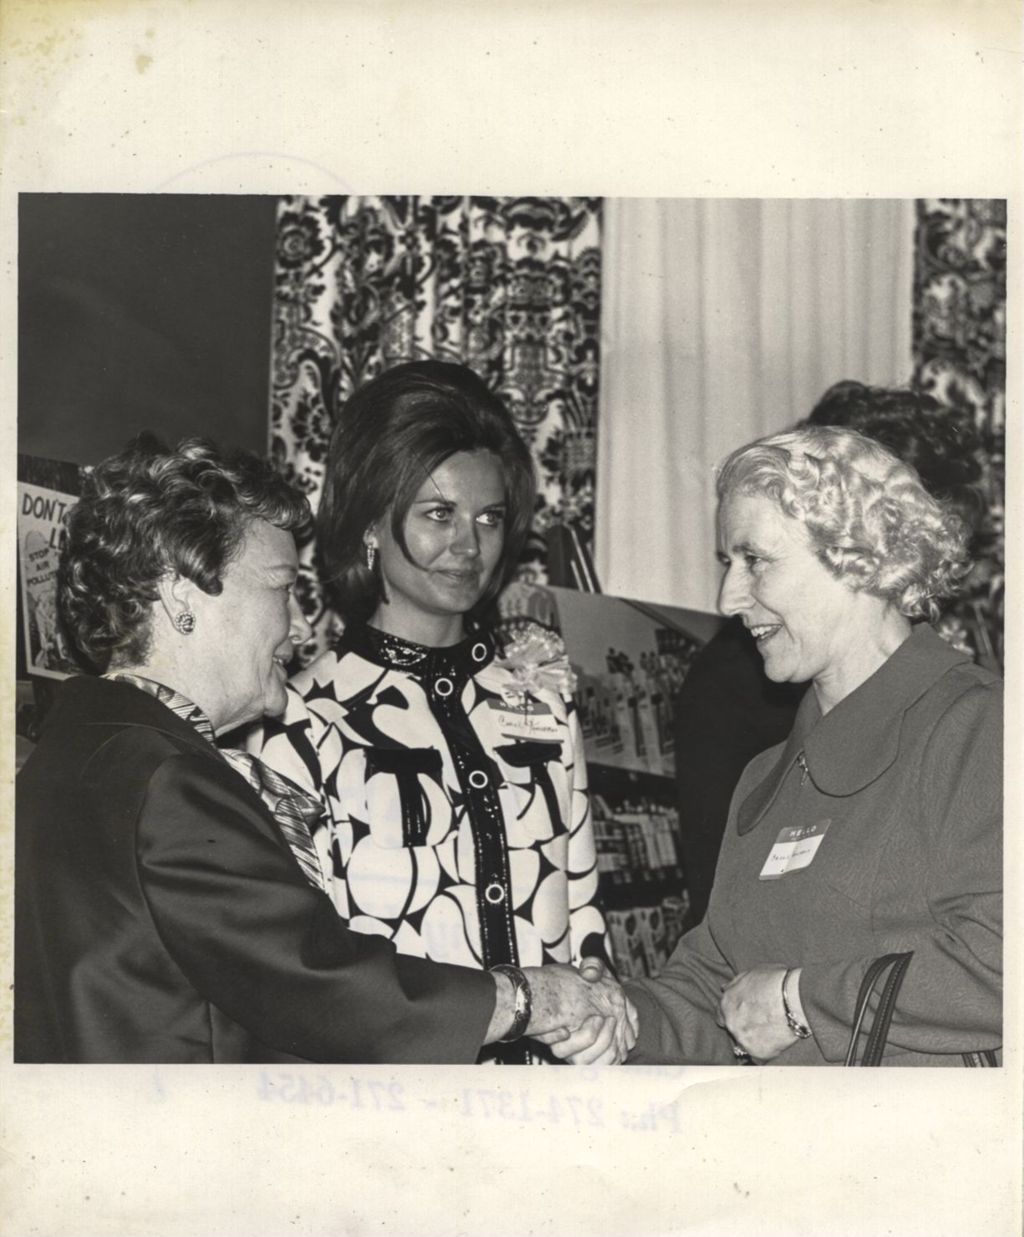 Eleanor Daley in a receiving line chatting with a woman at a "We Care" event